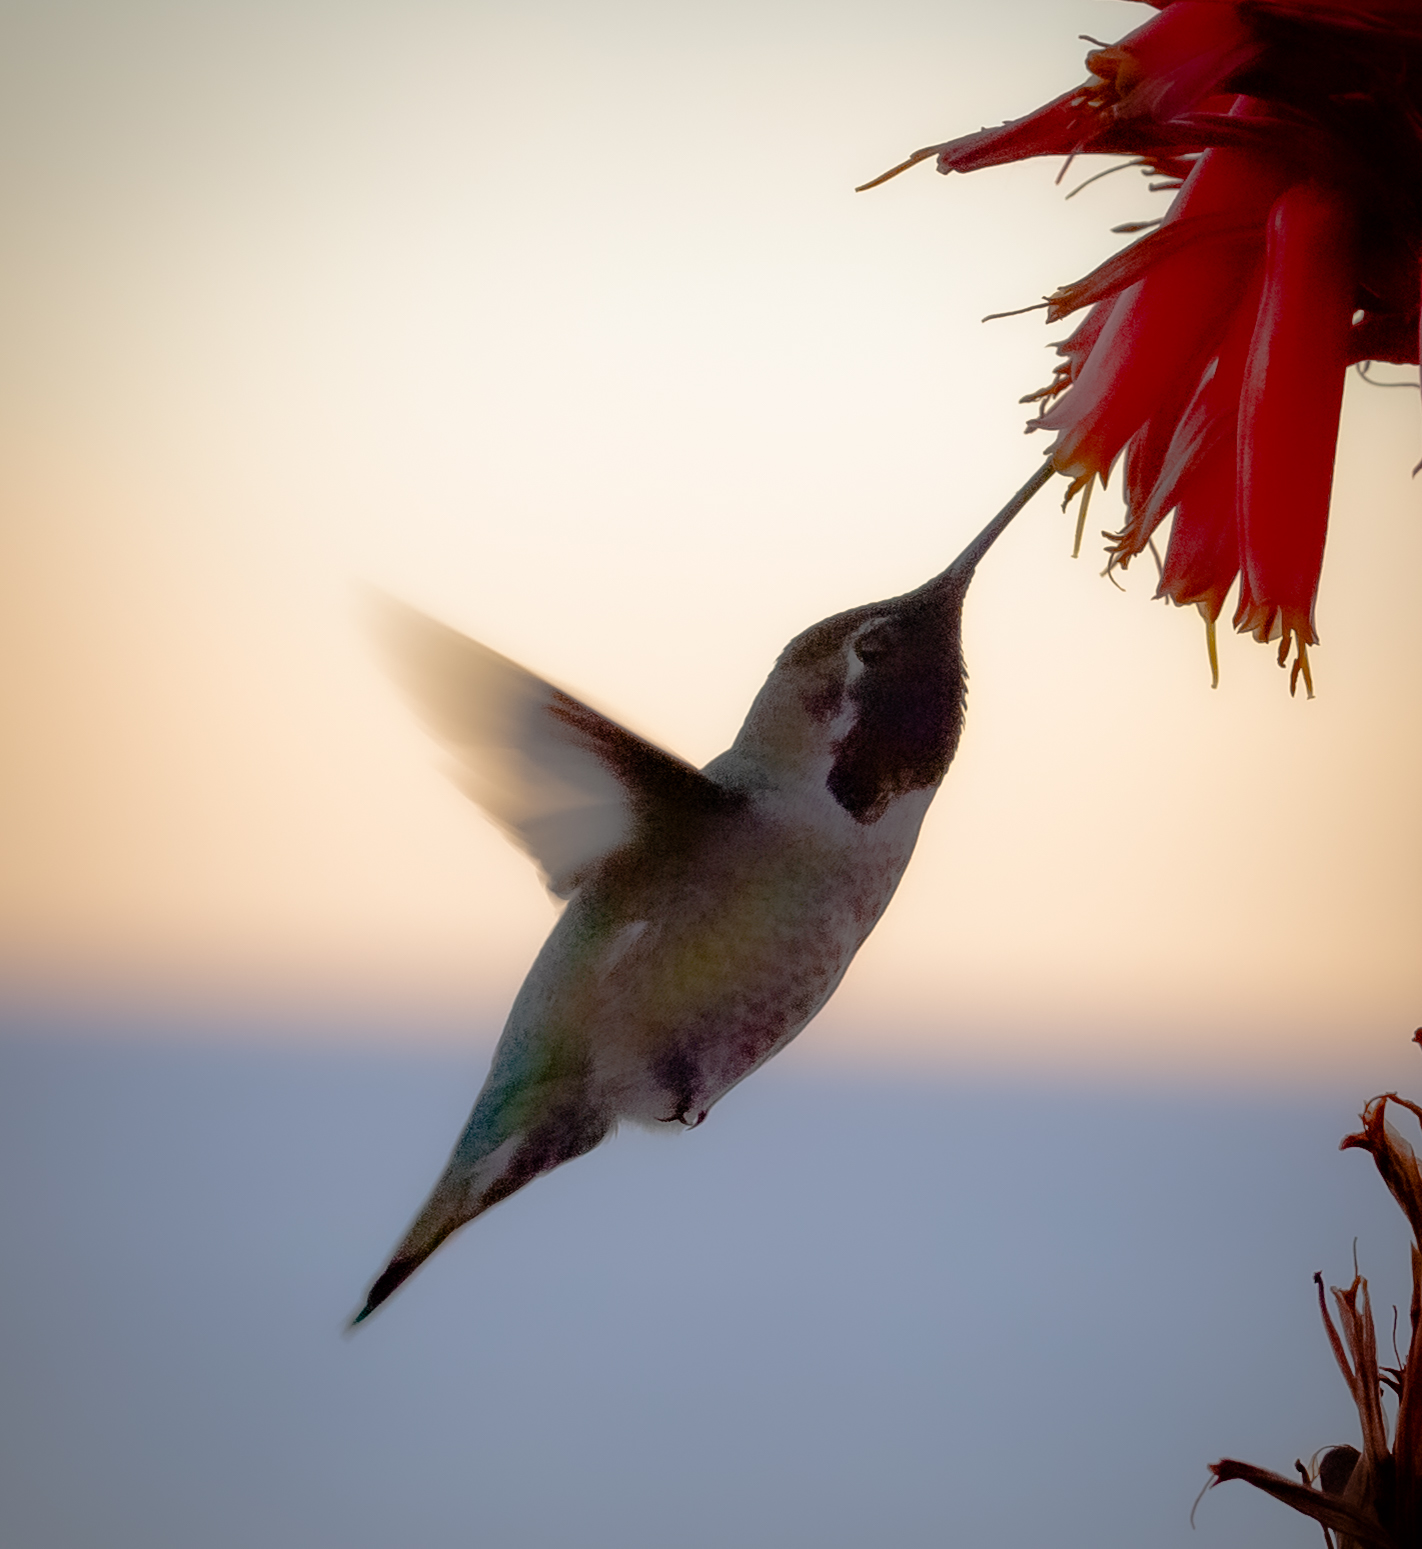 a hummingbird flying away from a red flower.